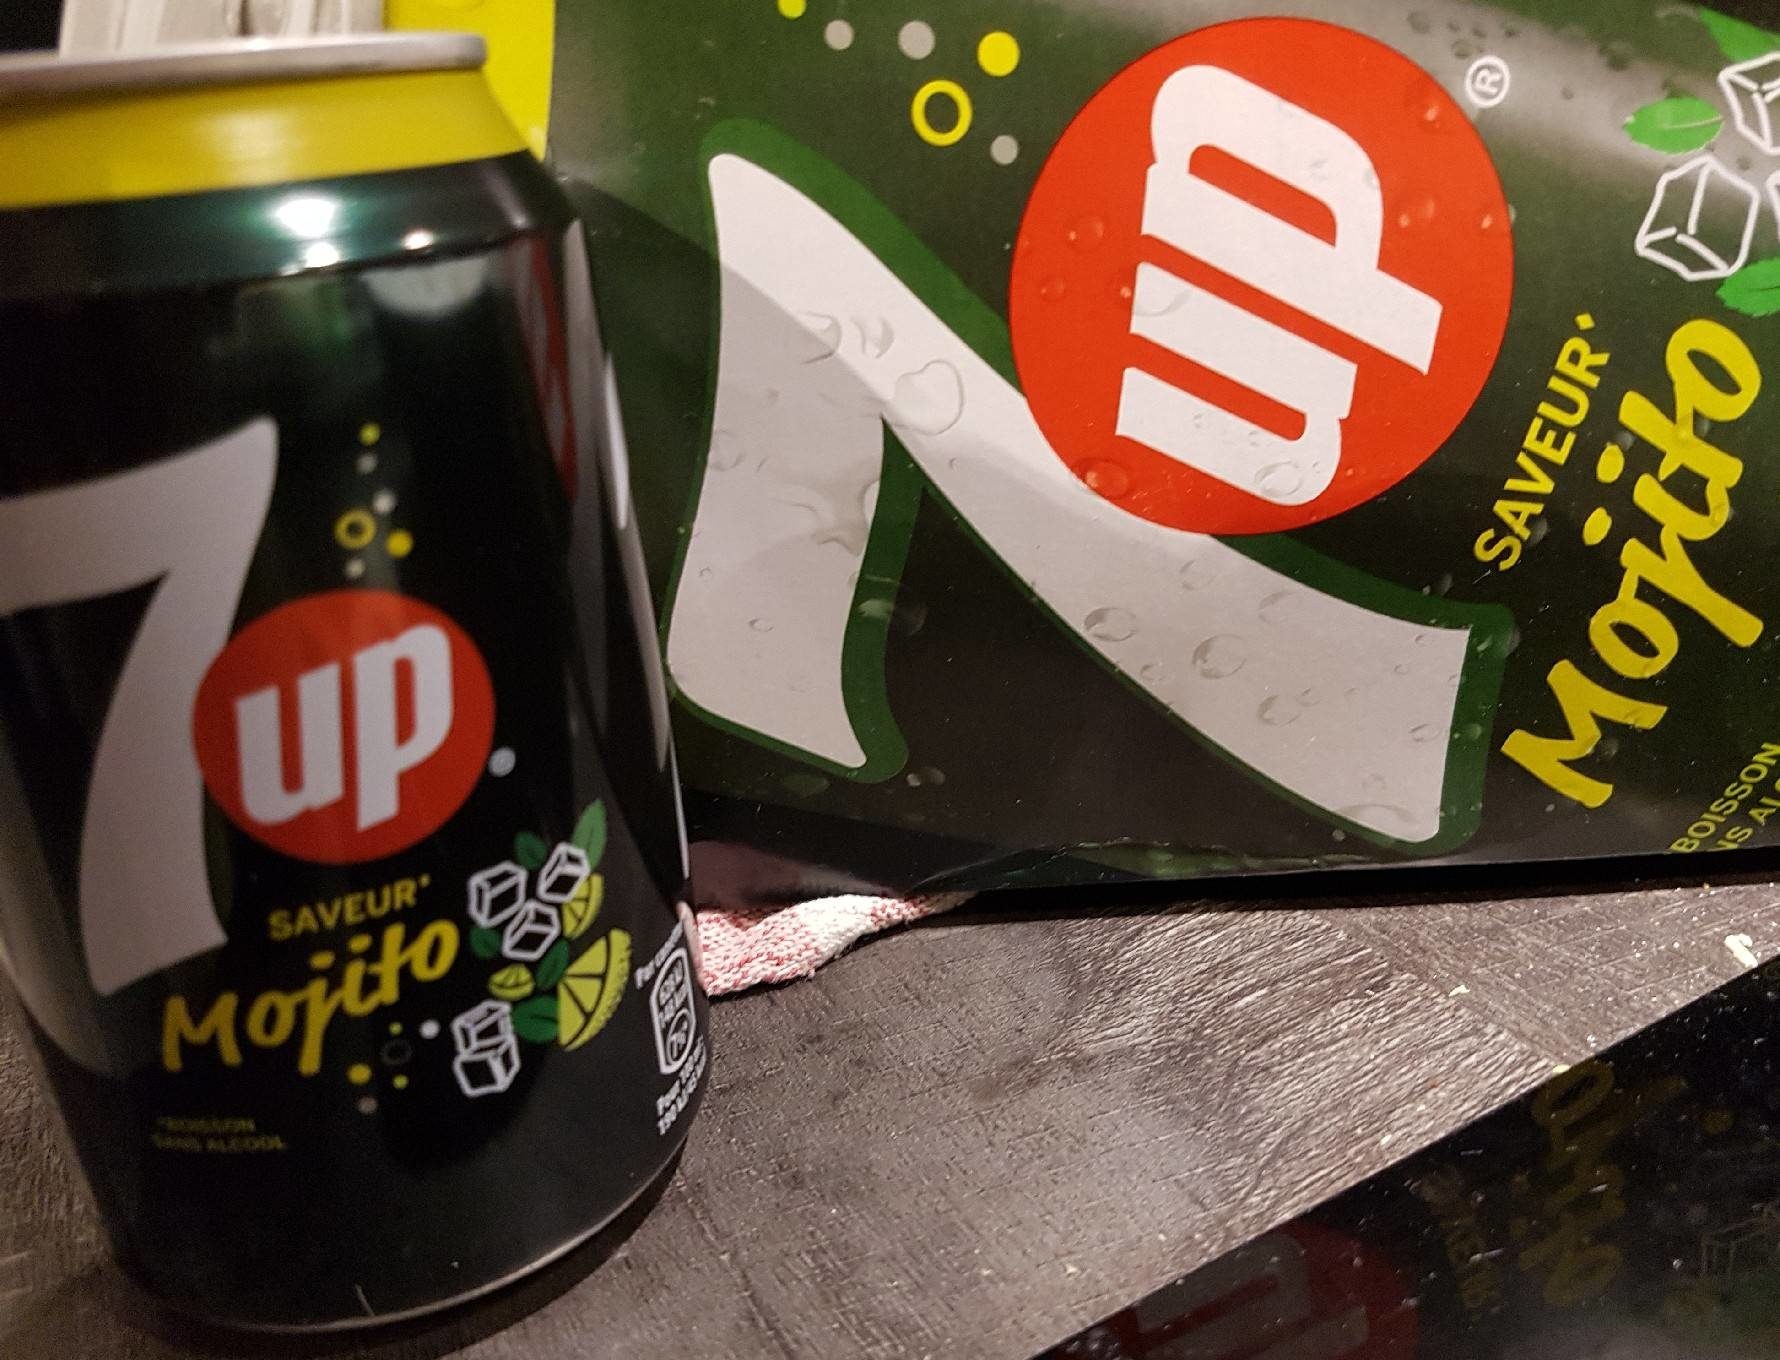 7up saveur mojito - Product - fr